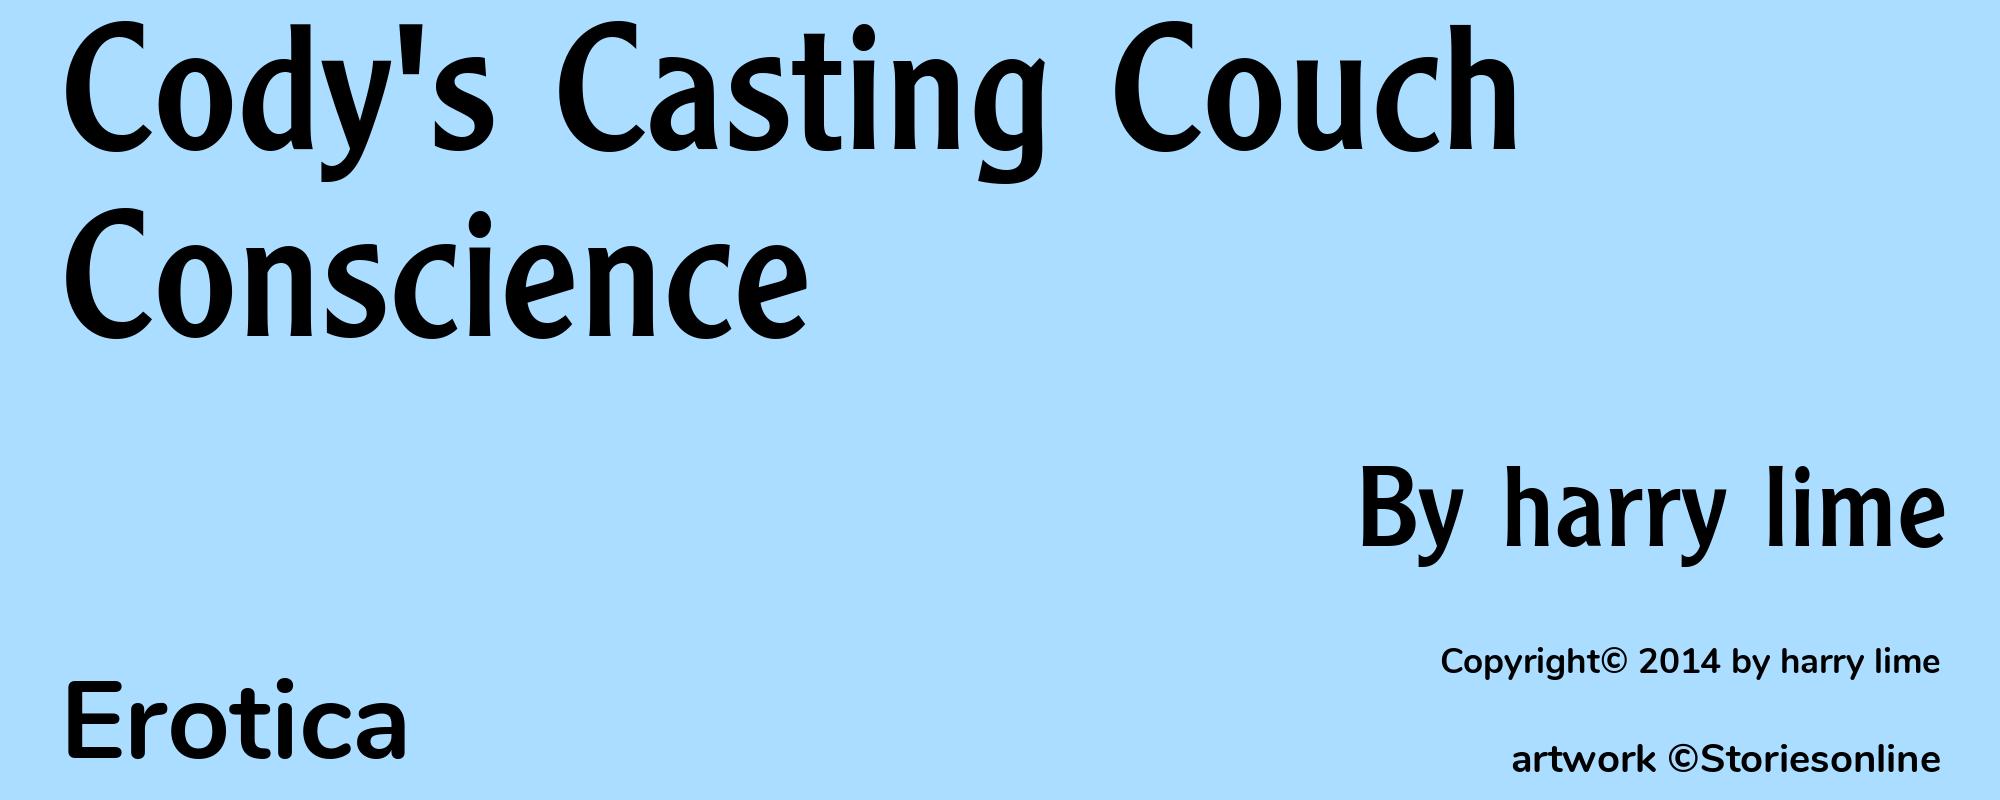 Cody's Casting Couch Conscience - Cover